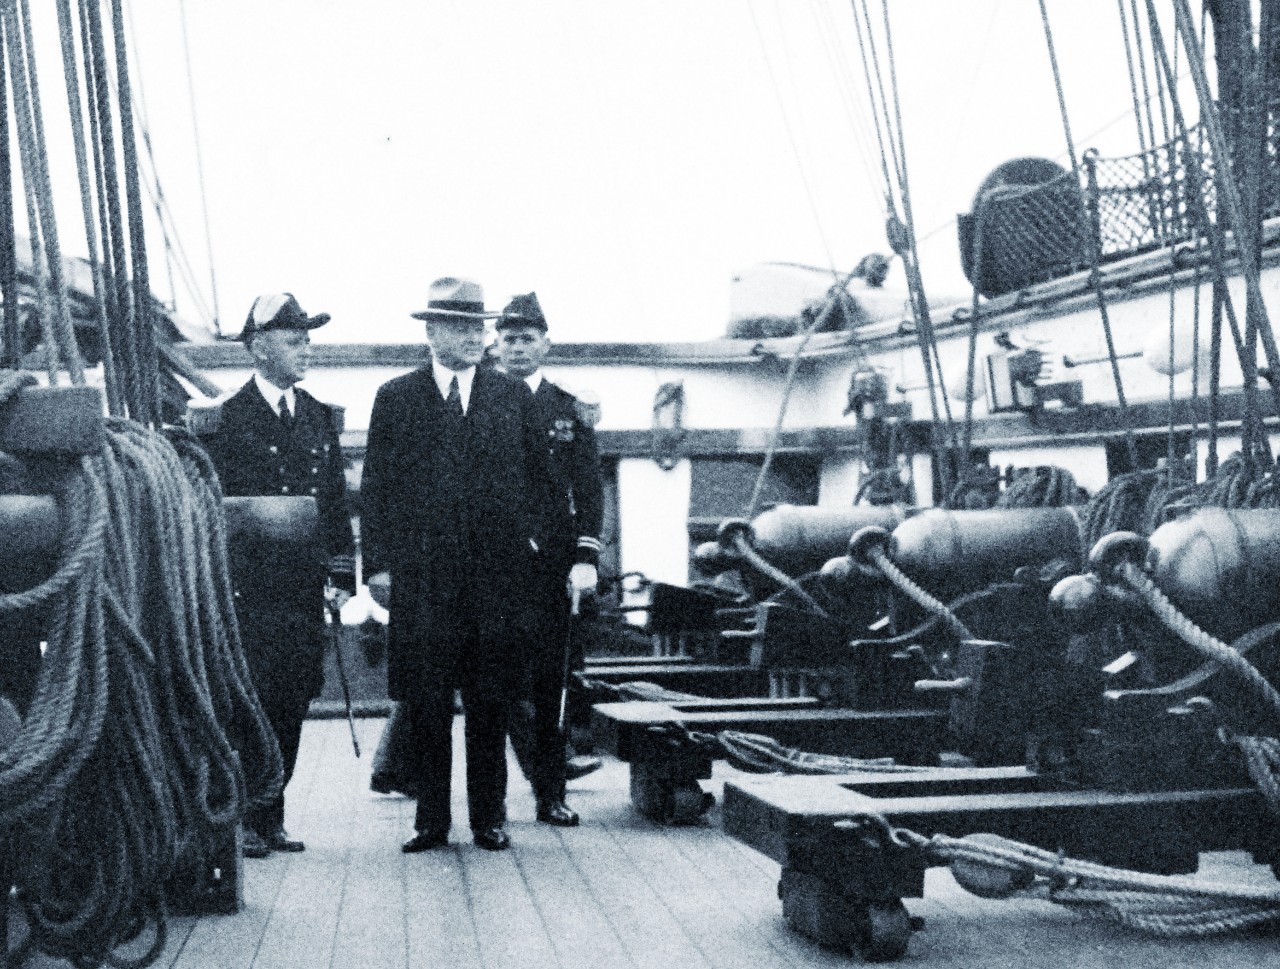 80-G-466362:   President Herbert Hoover inspects the frigate USS Constitution while at the Washington Navy Yard, 11 November 1931. Official U.S. Navy Photograph, now in the collections of the National Archives.    (2014/9/3).   